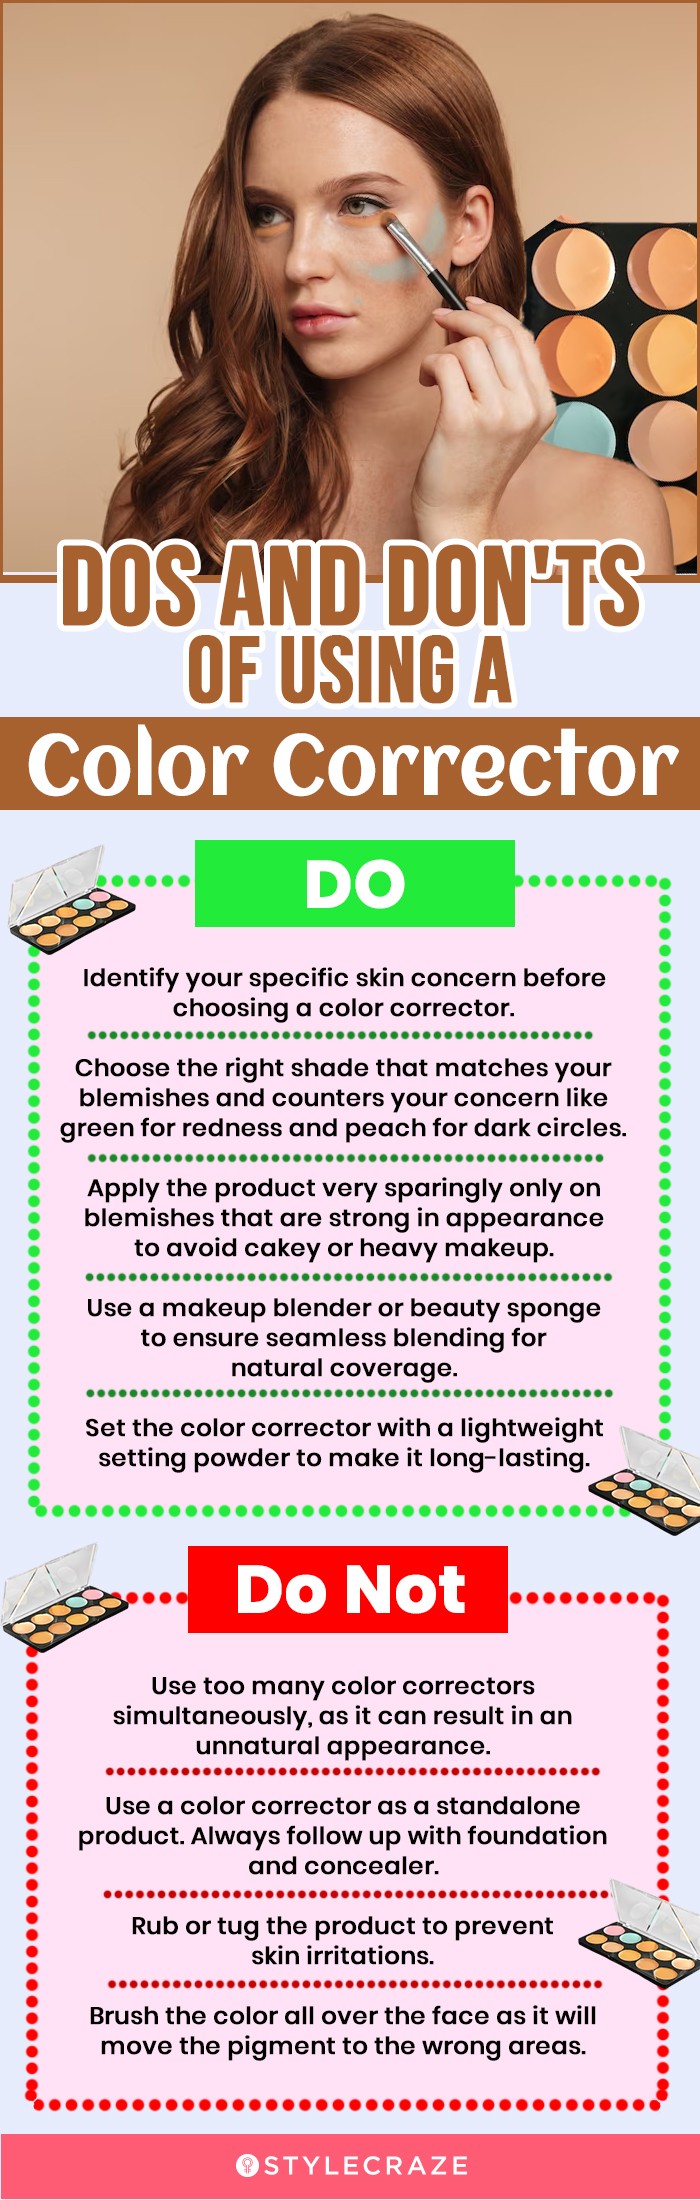 Dos And Don'ts Of Using A Color Corrector (infographic)